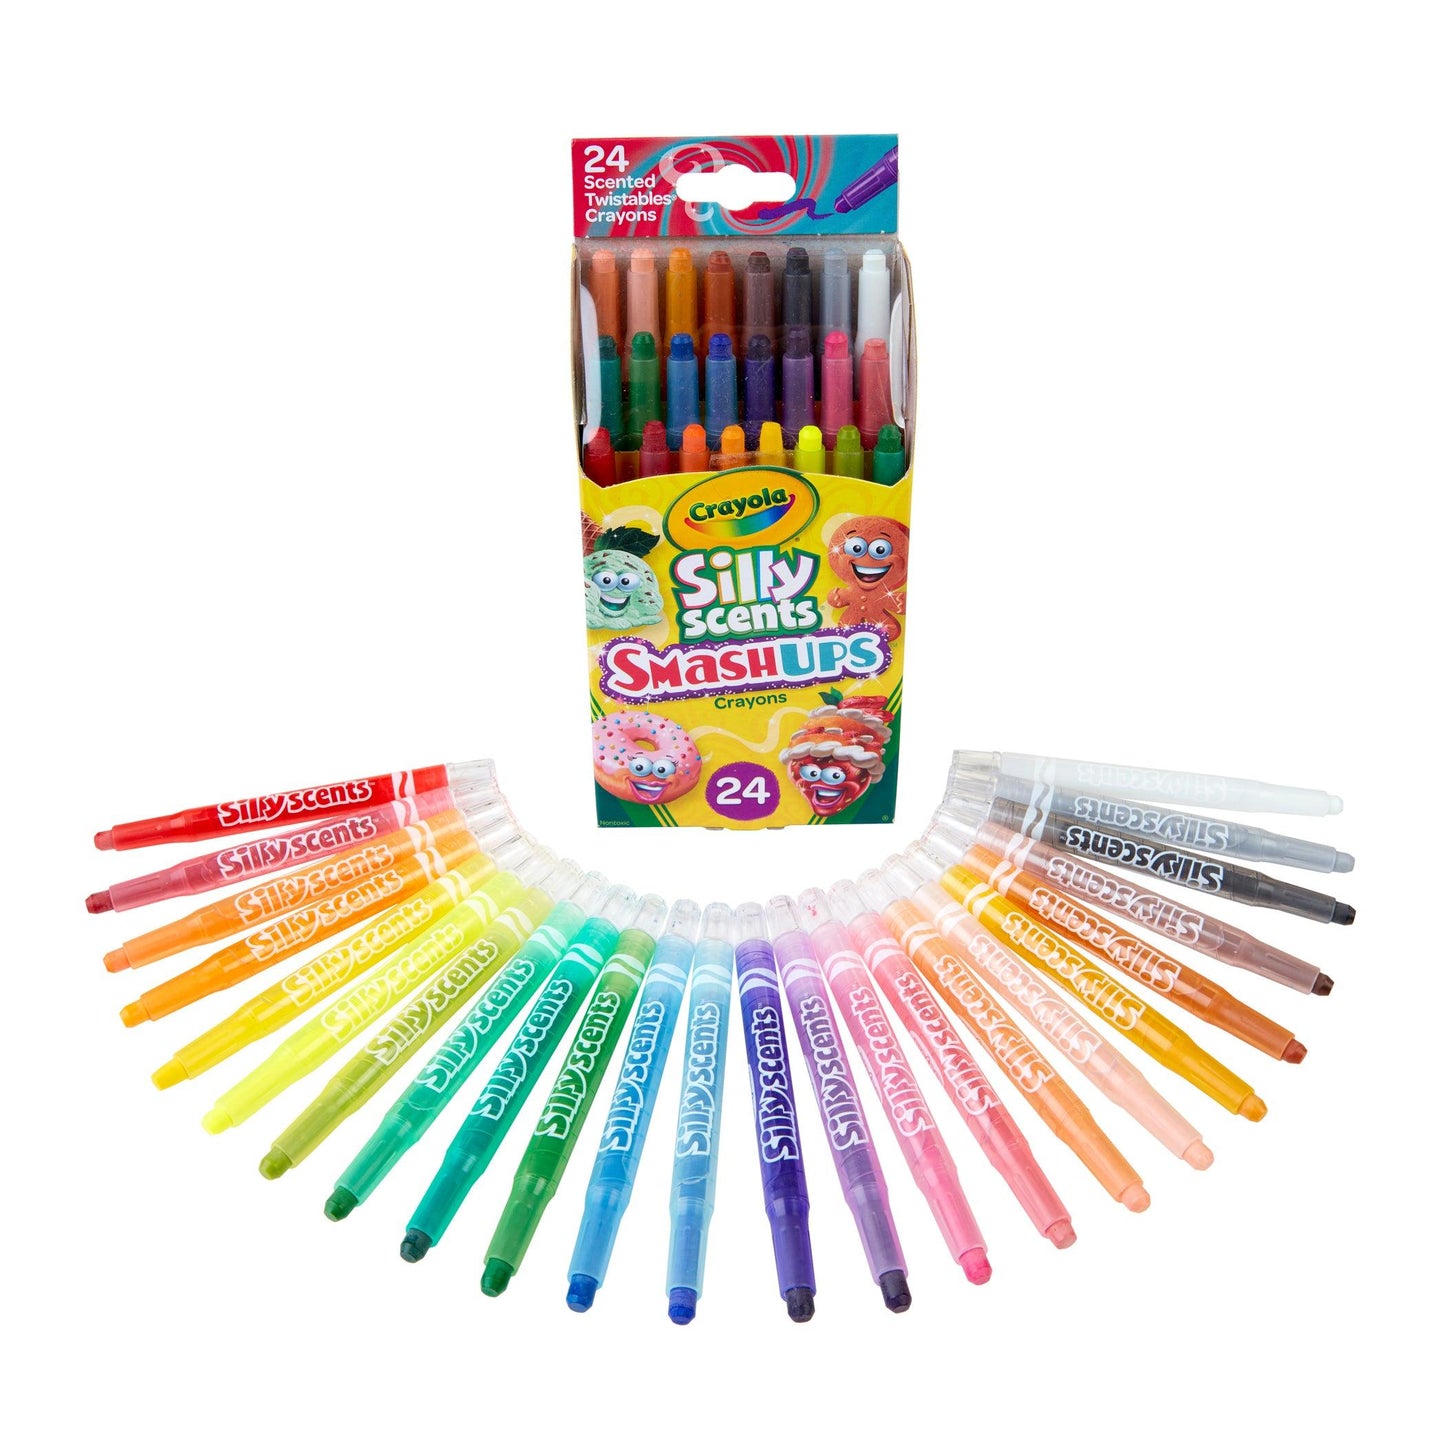 Silly Scents™ Smash Ups Mini Twistables Scented Crayons, 24 Per Pack, 4 Packs - Loomini